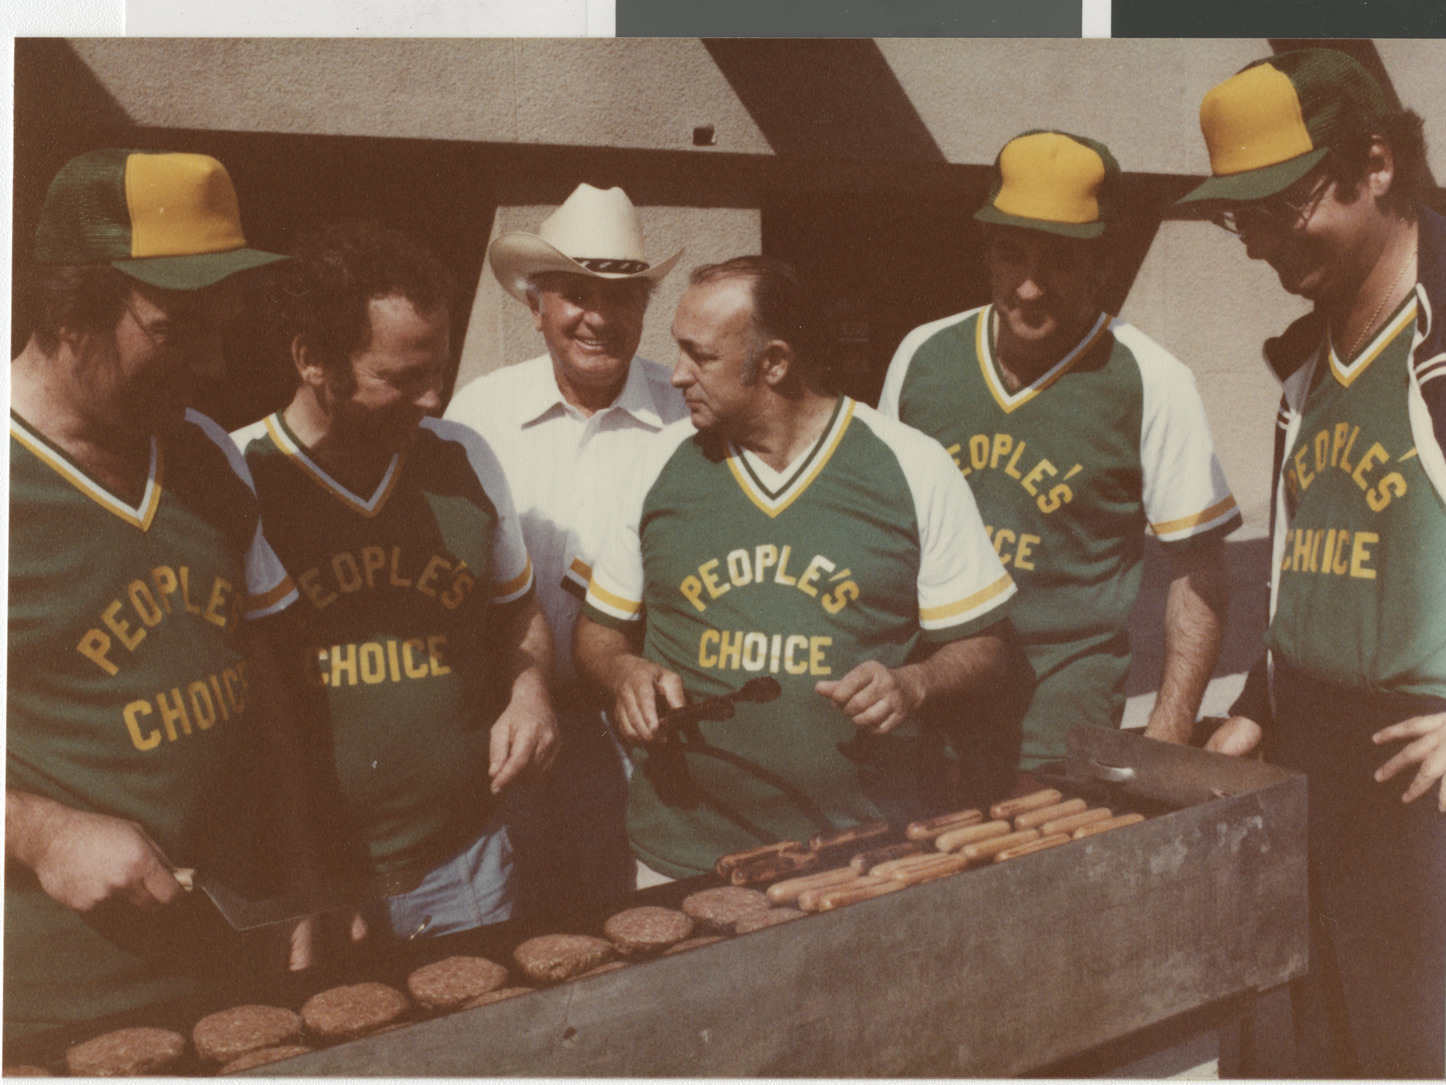 Photograph of Ron Lurie and others around a barbeque grill